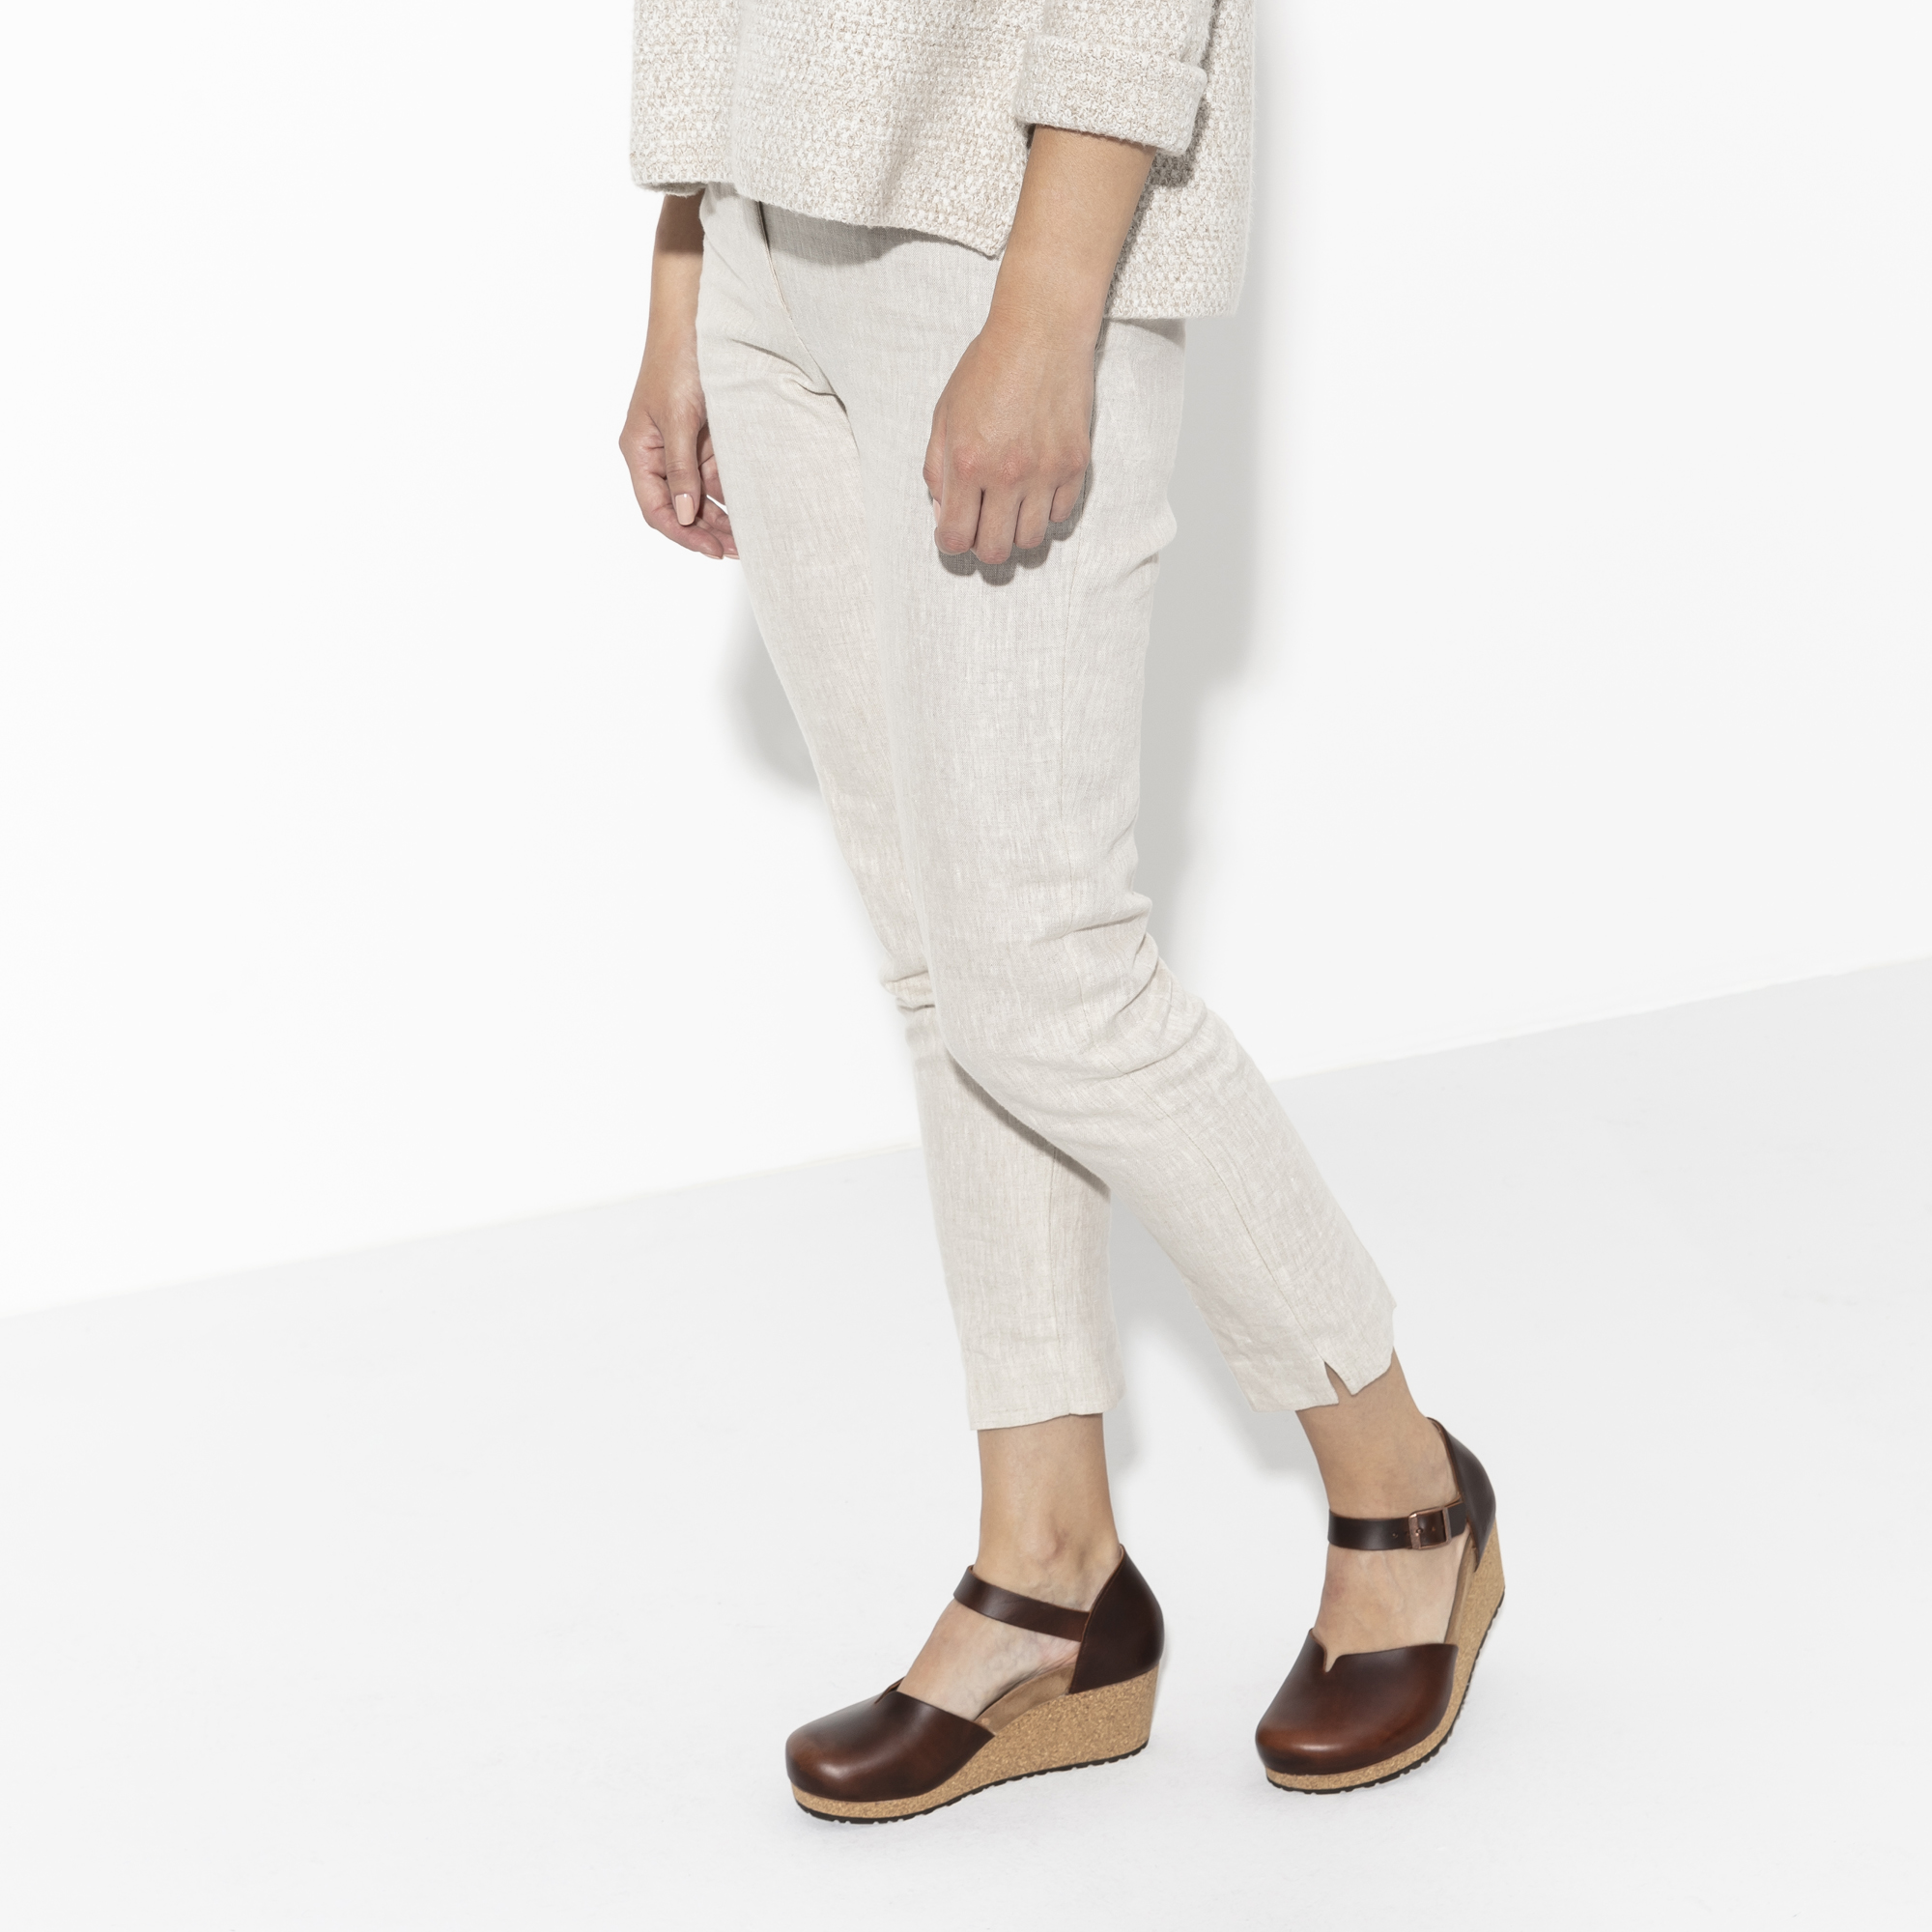 Mary Leather | shop online at BIRKENSTOCK